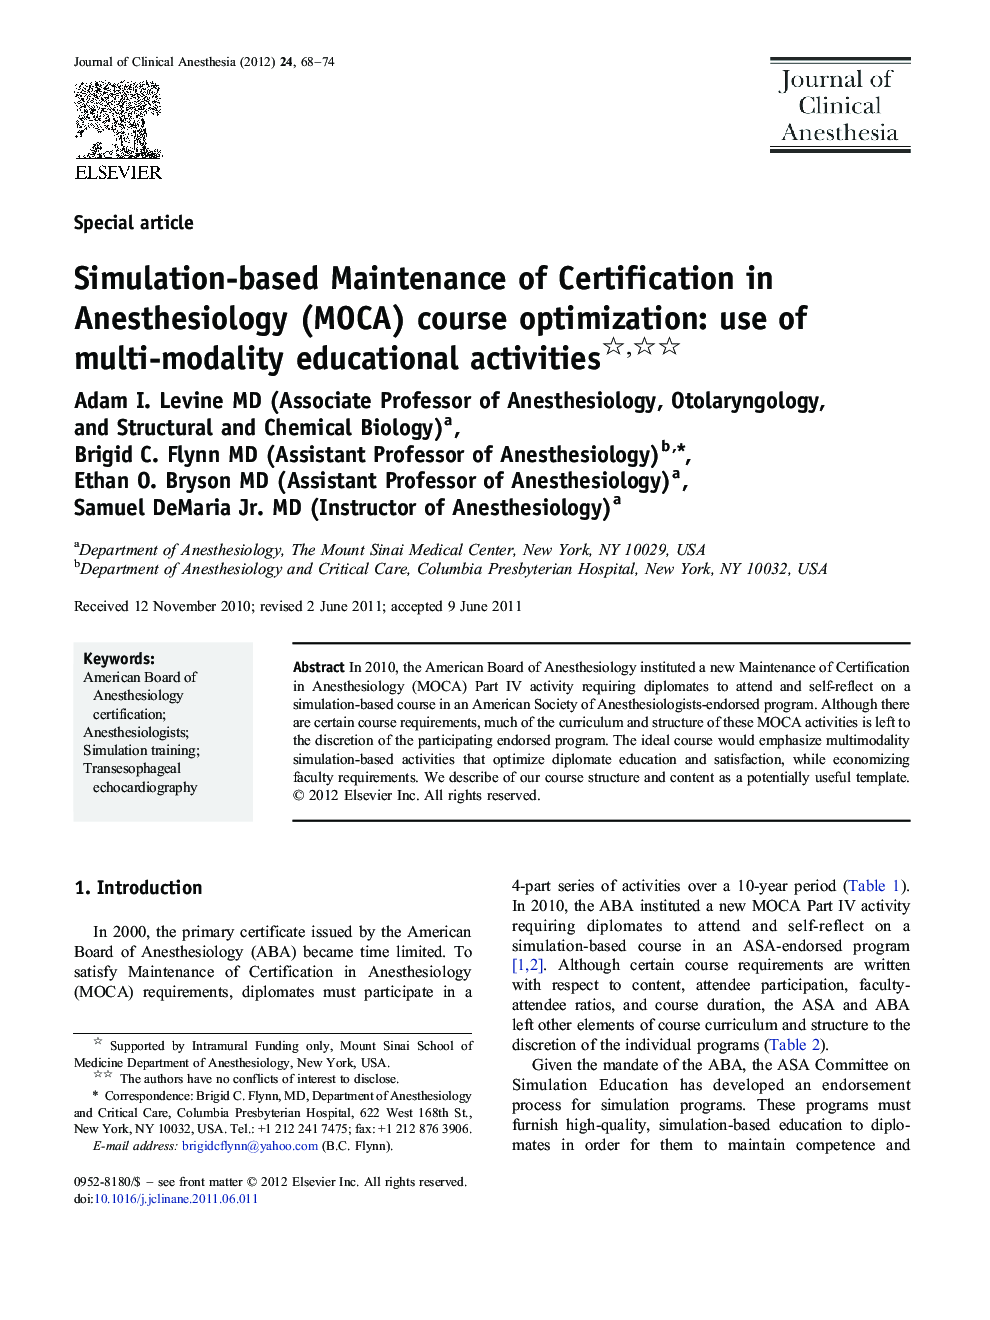 Simulation-based Maintenance of Certification in Anesthesiology (MOCA) course optimization: use of multi-modality educational activities 